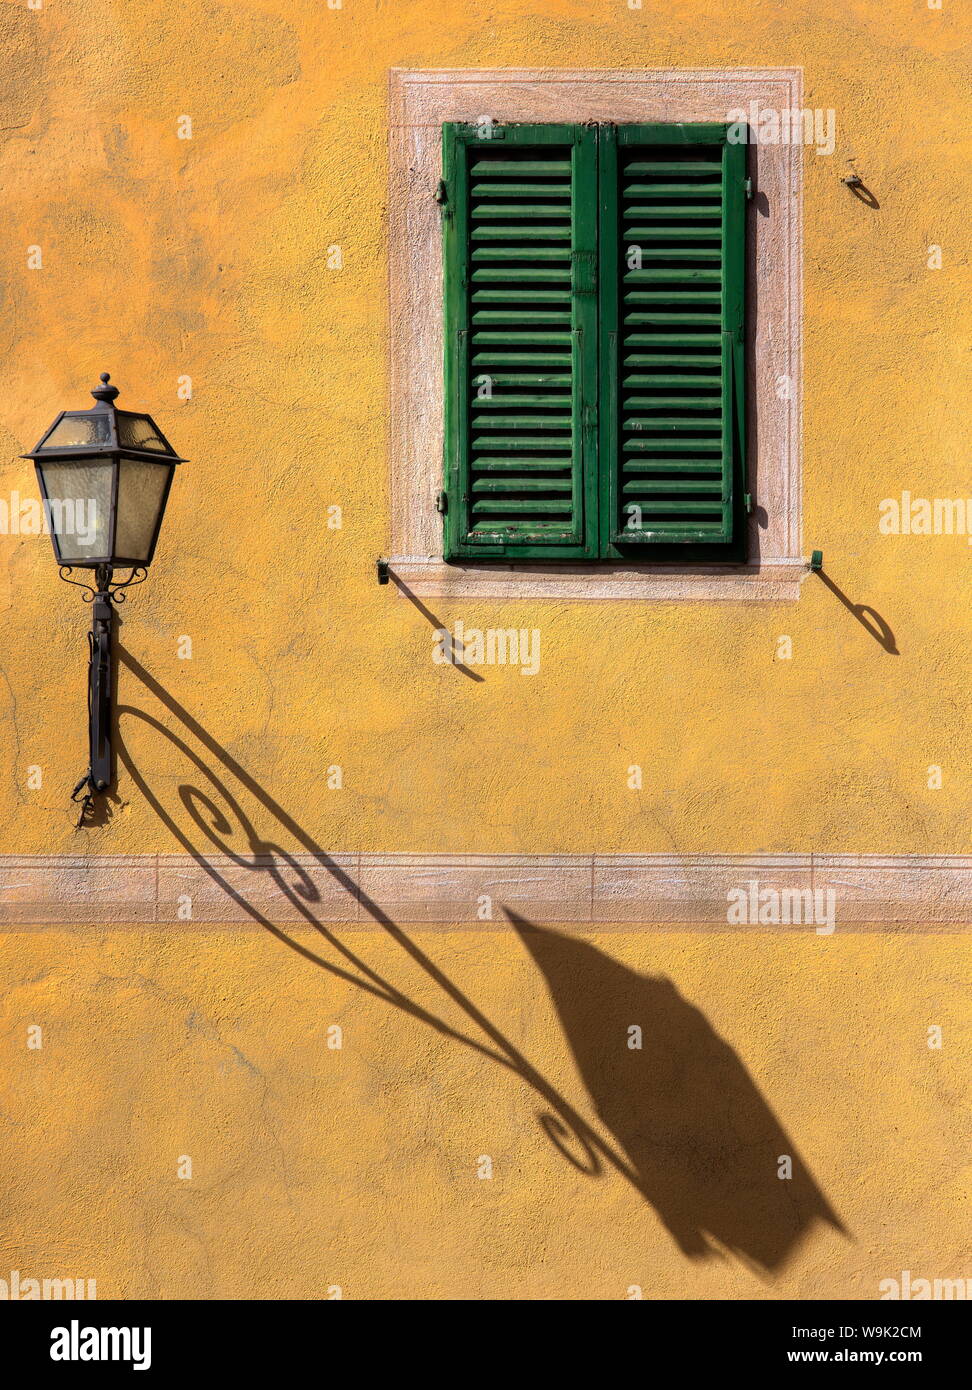 Architectural detail showing green wooden shutter on yellow wall with ornate wall lamp and shadow, San Quirico d'Orcia, Tuscany, Italy, Europe Stock Photo